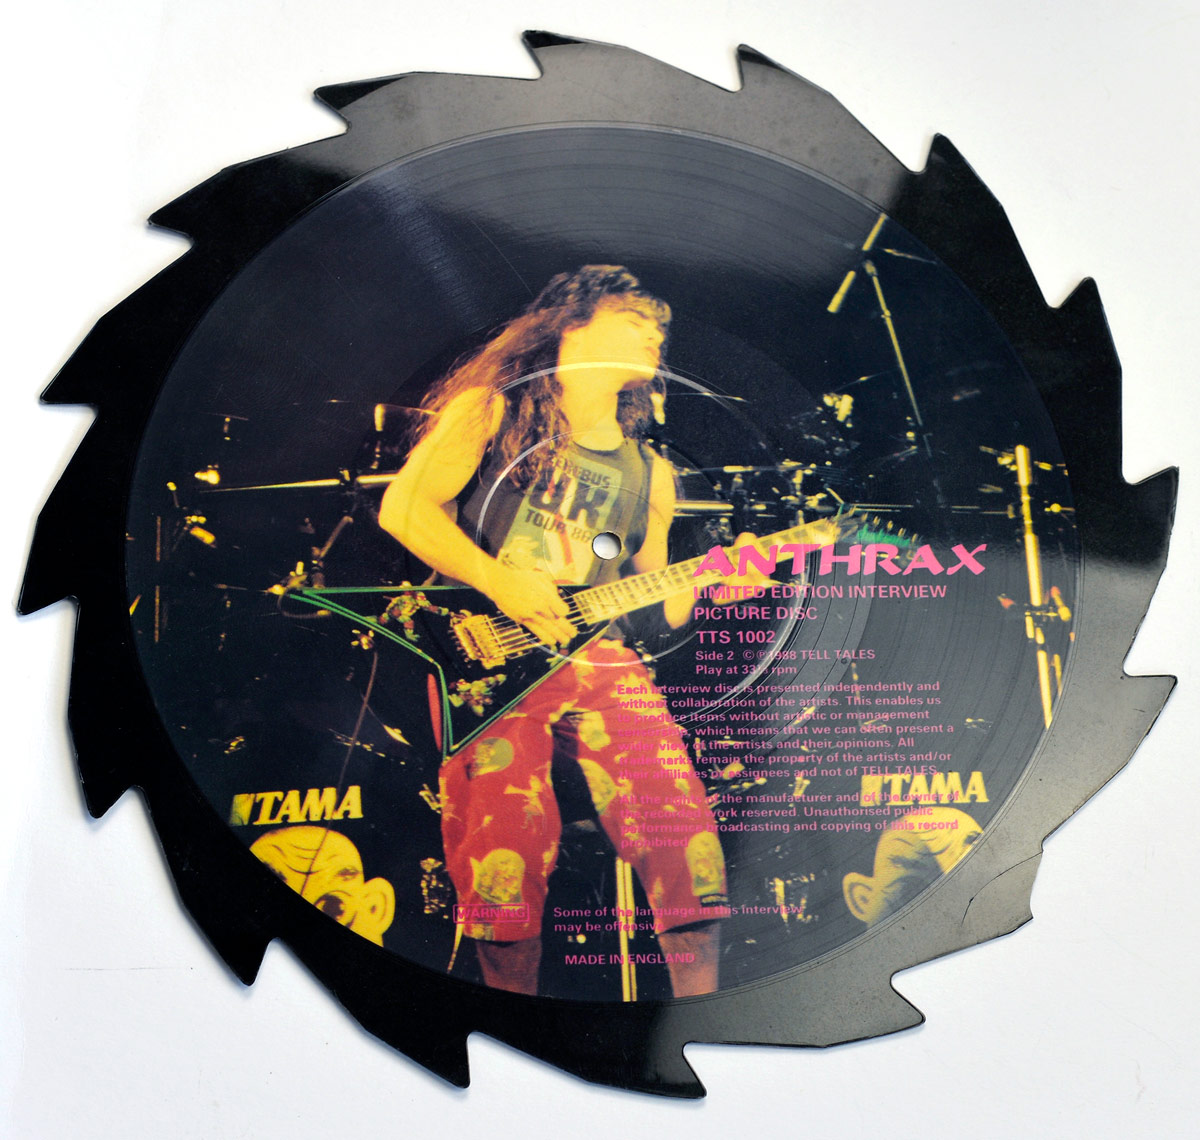 Photo of 12" LP Record Side Two ANTHRAX Limited Edition Interview Picture Disc  Vinyl Record Gallery https://vinyl-records.nl//